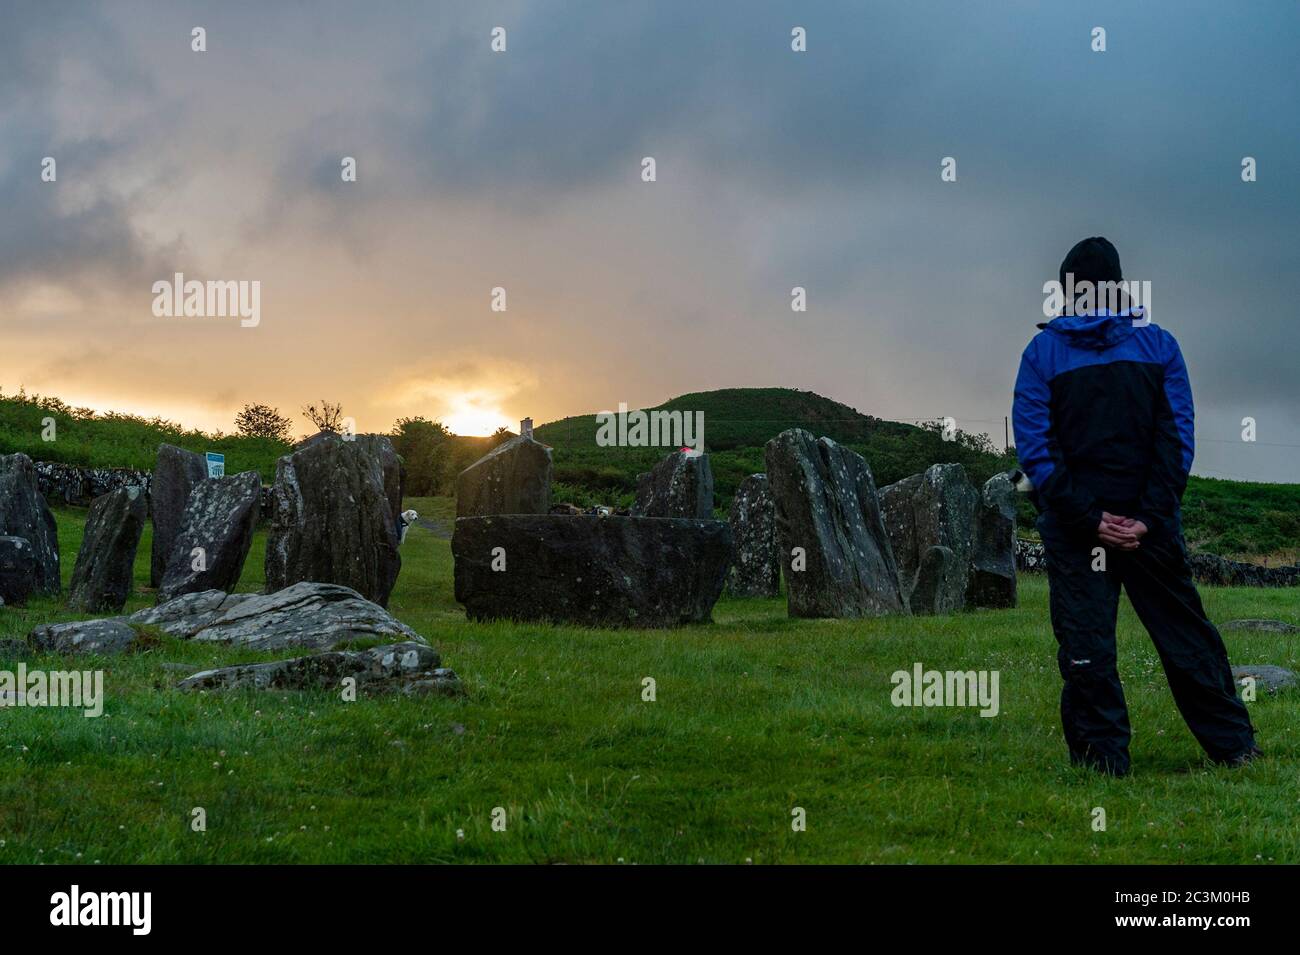 Glandore, West Cork, Ireland. 21st June, 2020. The sun rises over the Drombeg Stone Circle marking the start of the summer solstice, the longest day of the year. The Drombeg Stone Circle, also known as The Druid's Altar, is a Megalithic stone circle. Credit: AG News/Alamy Live News Stock Photo